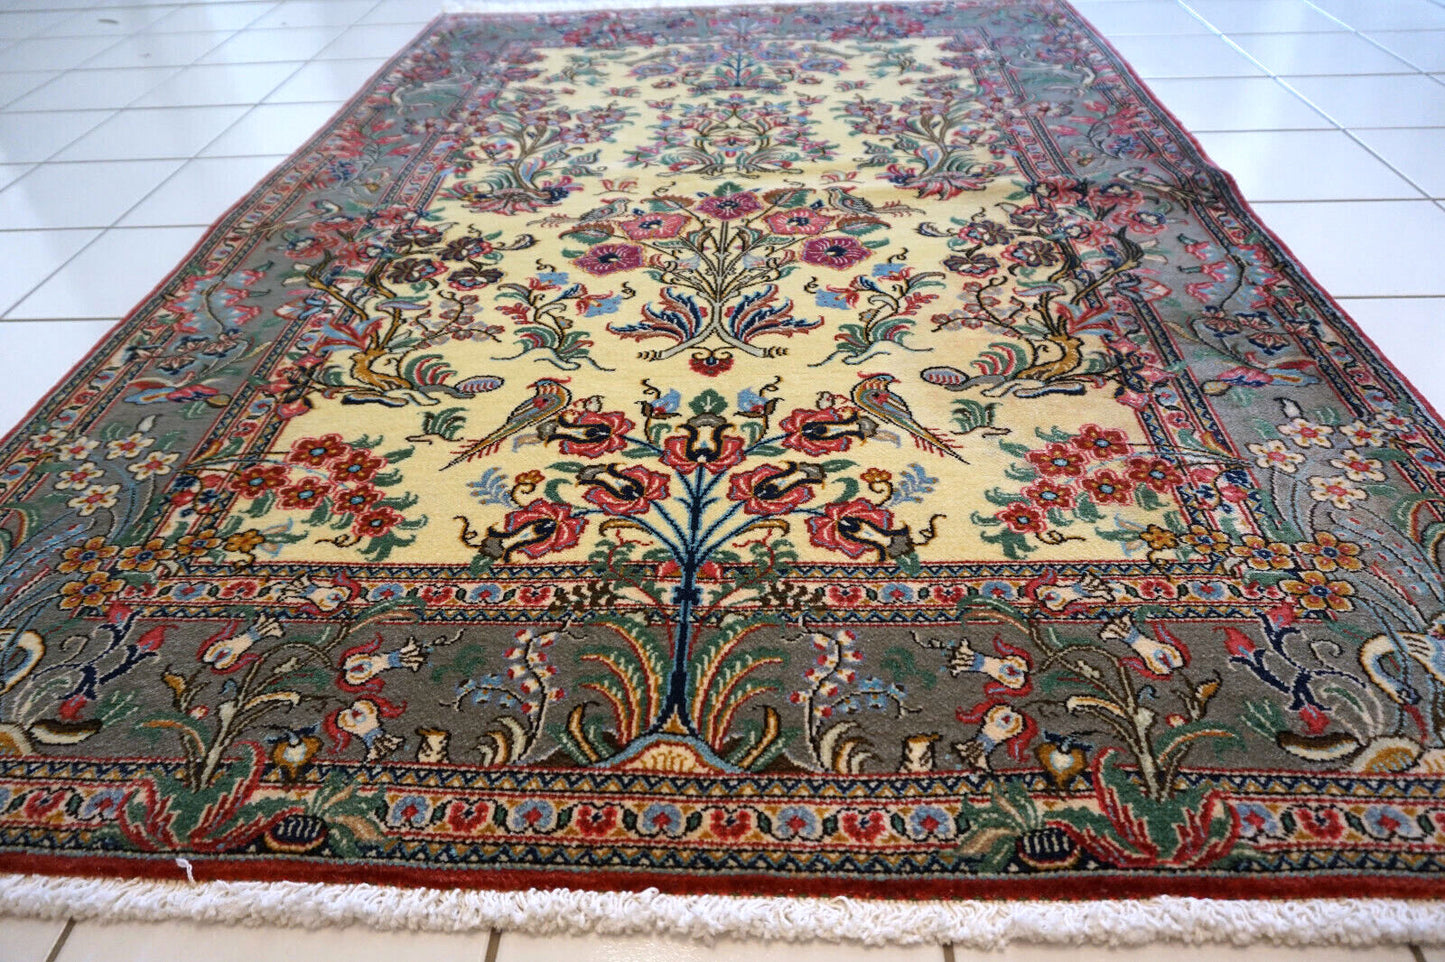 Close-up of the colorful flowers and birds design on the vintage Qum rug.